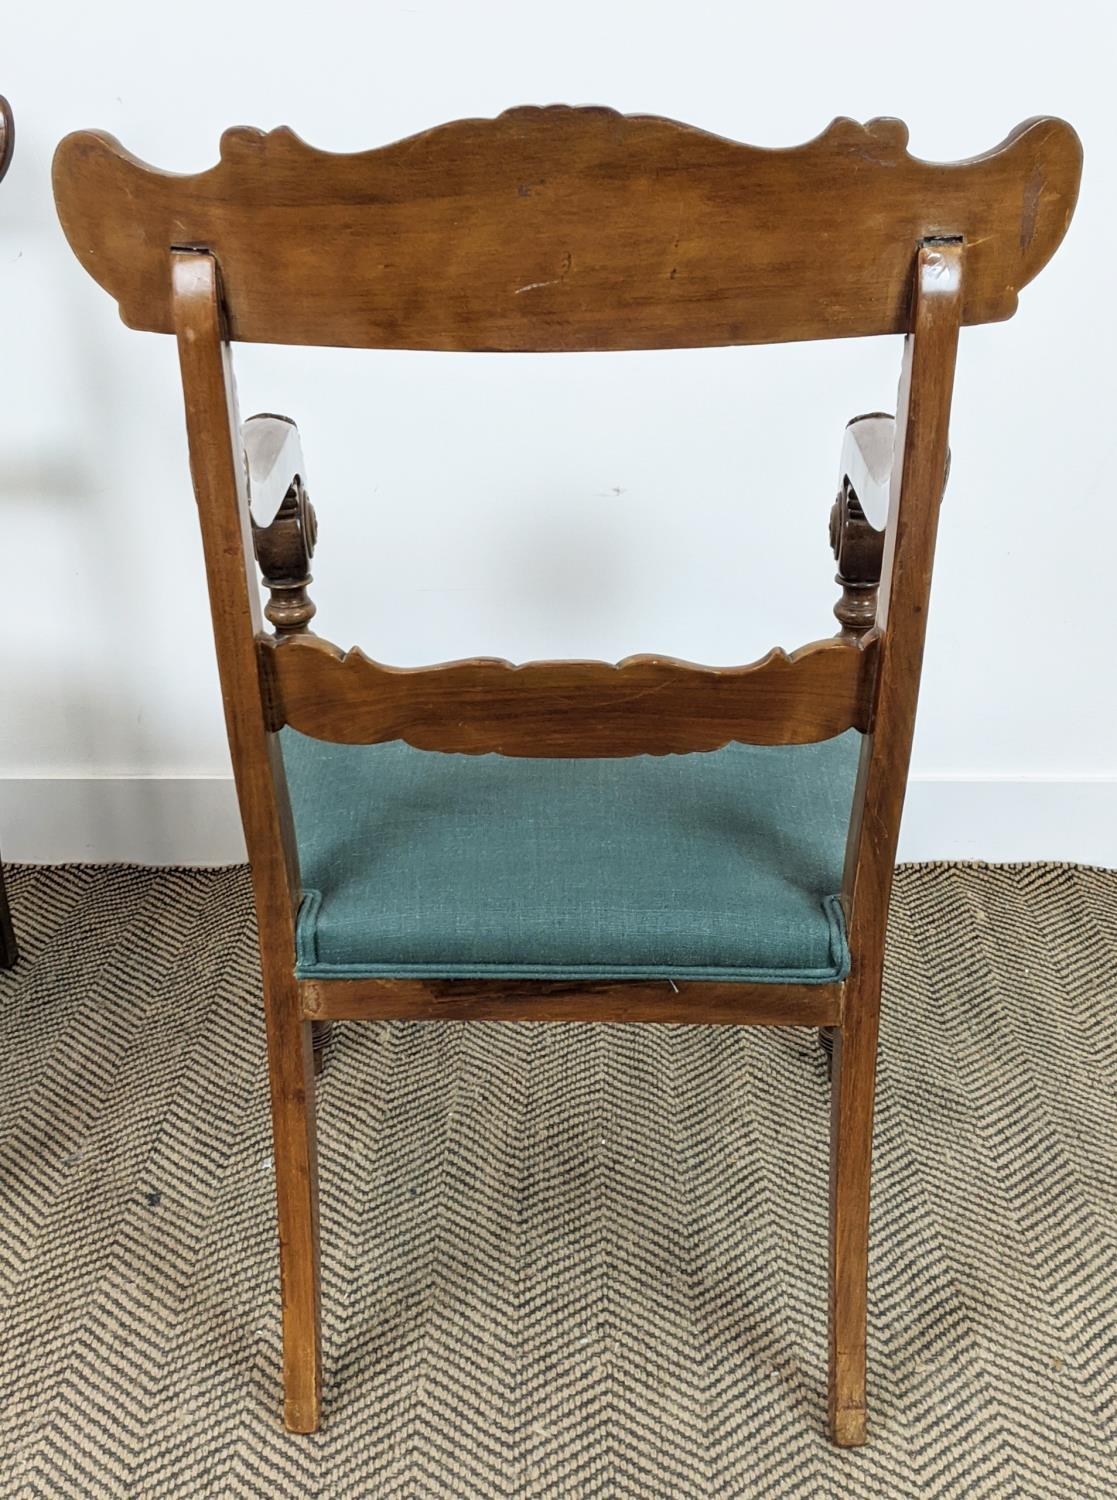 ARMCHAIRS, a pair, mid 19th century mahogany with green stuffover seats, 91cm H x 58cm x 58cm. (2) - Image 15 of 18